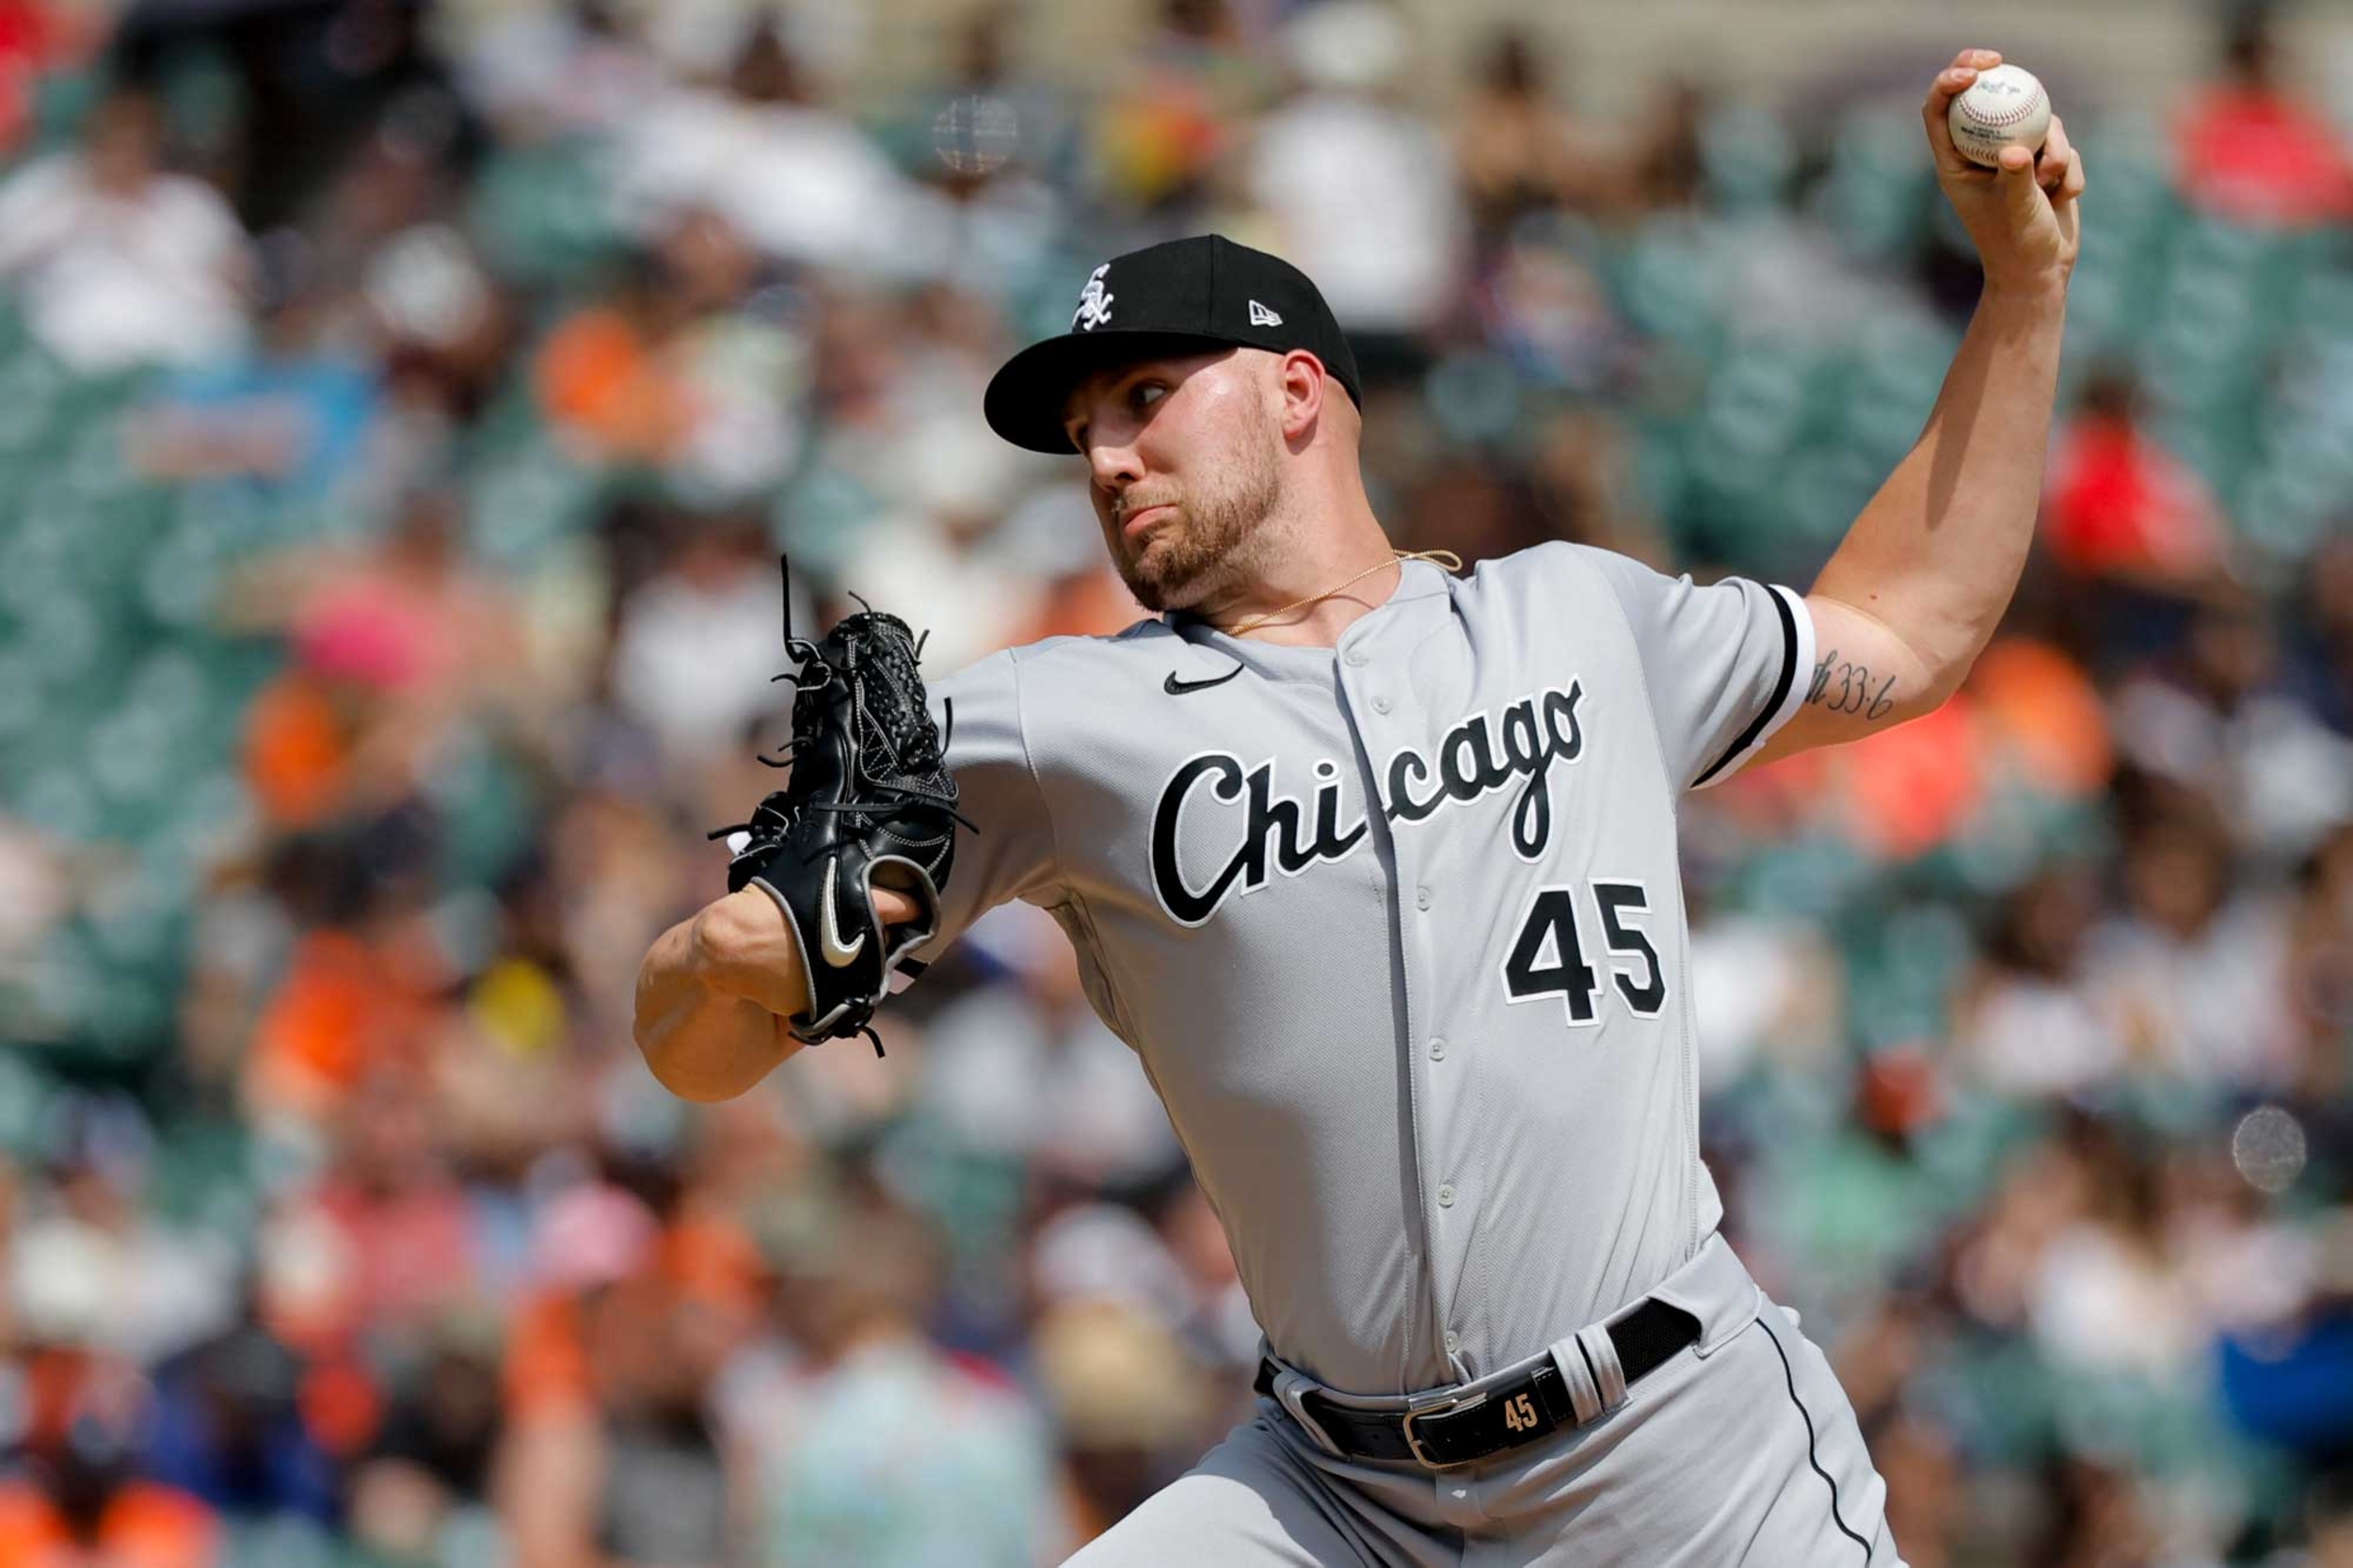 <p>Injuries and poor control have sidetracked Crochet's career, but the White Sox still have high hopes for their former first-round pick. He's being stretched out as a starter this spring and could emerge as an ace for the rebuilding team.</p><p><a href='https://www.msn.com/en-us/community/channel/vid-cj9pqbr0vn9in2b6ddcd8sfgpfq6x6utp44fssrv6mc2gtybw0us'>Follow us on MSN to see more of our exclusive MLB content.</a></p>